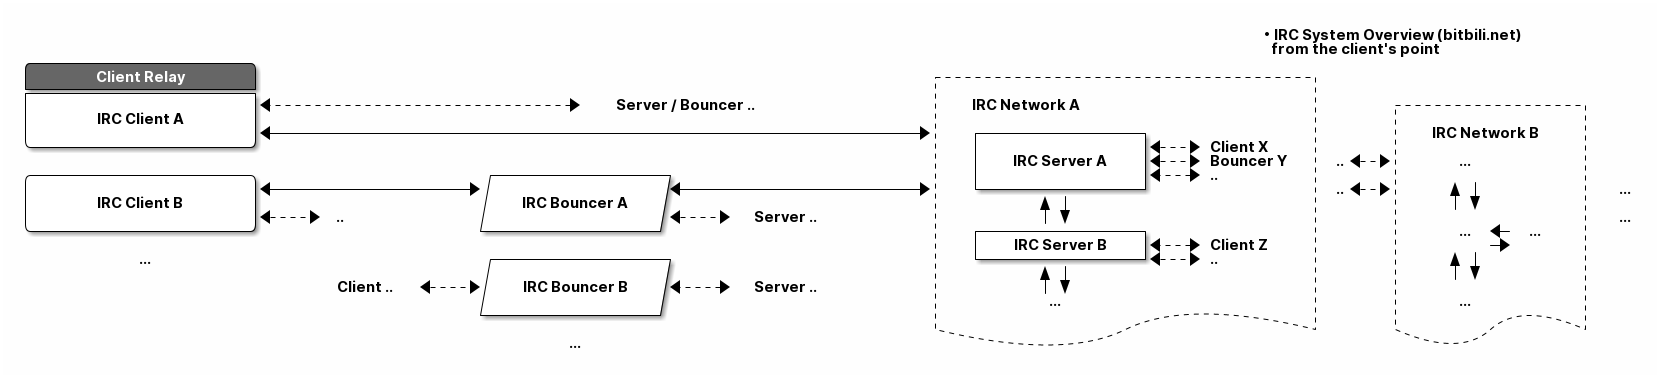 IRC System Overview